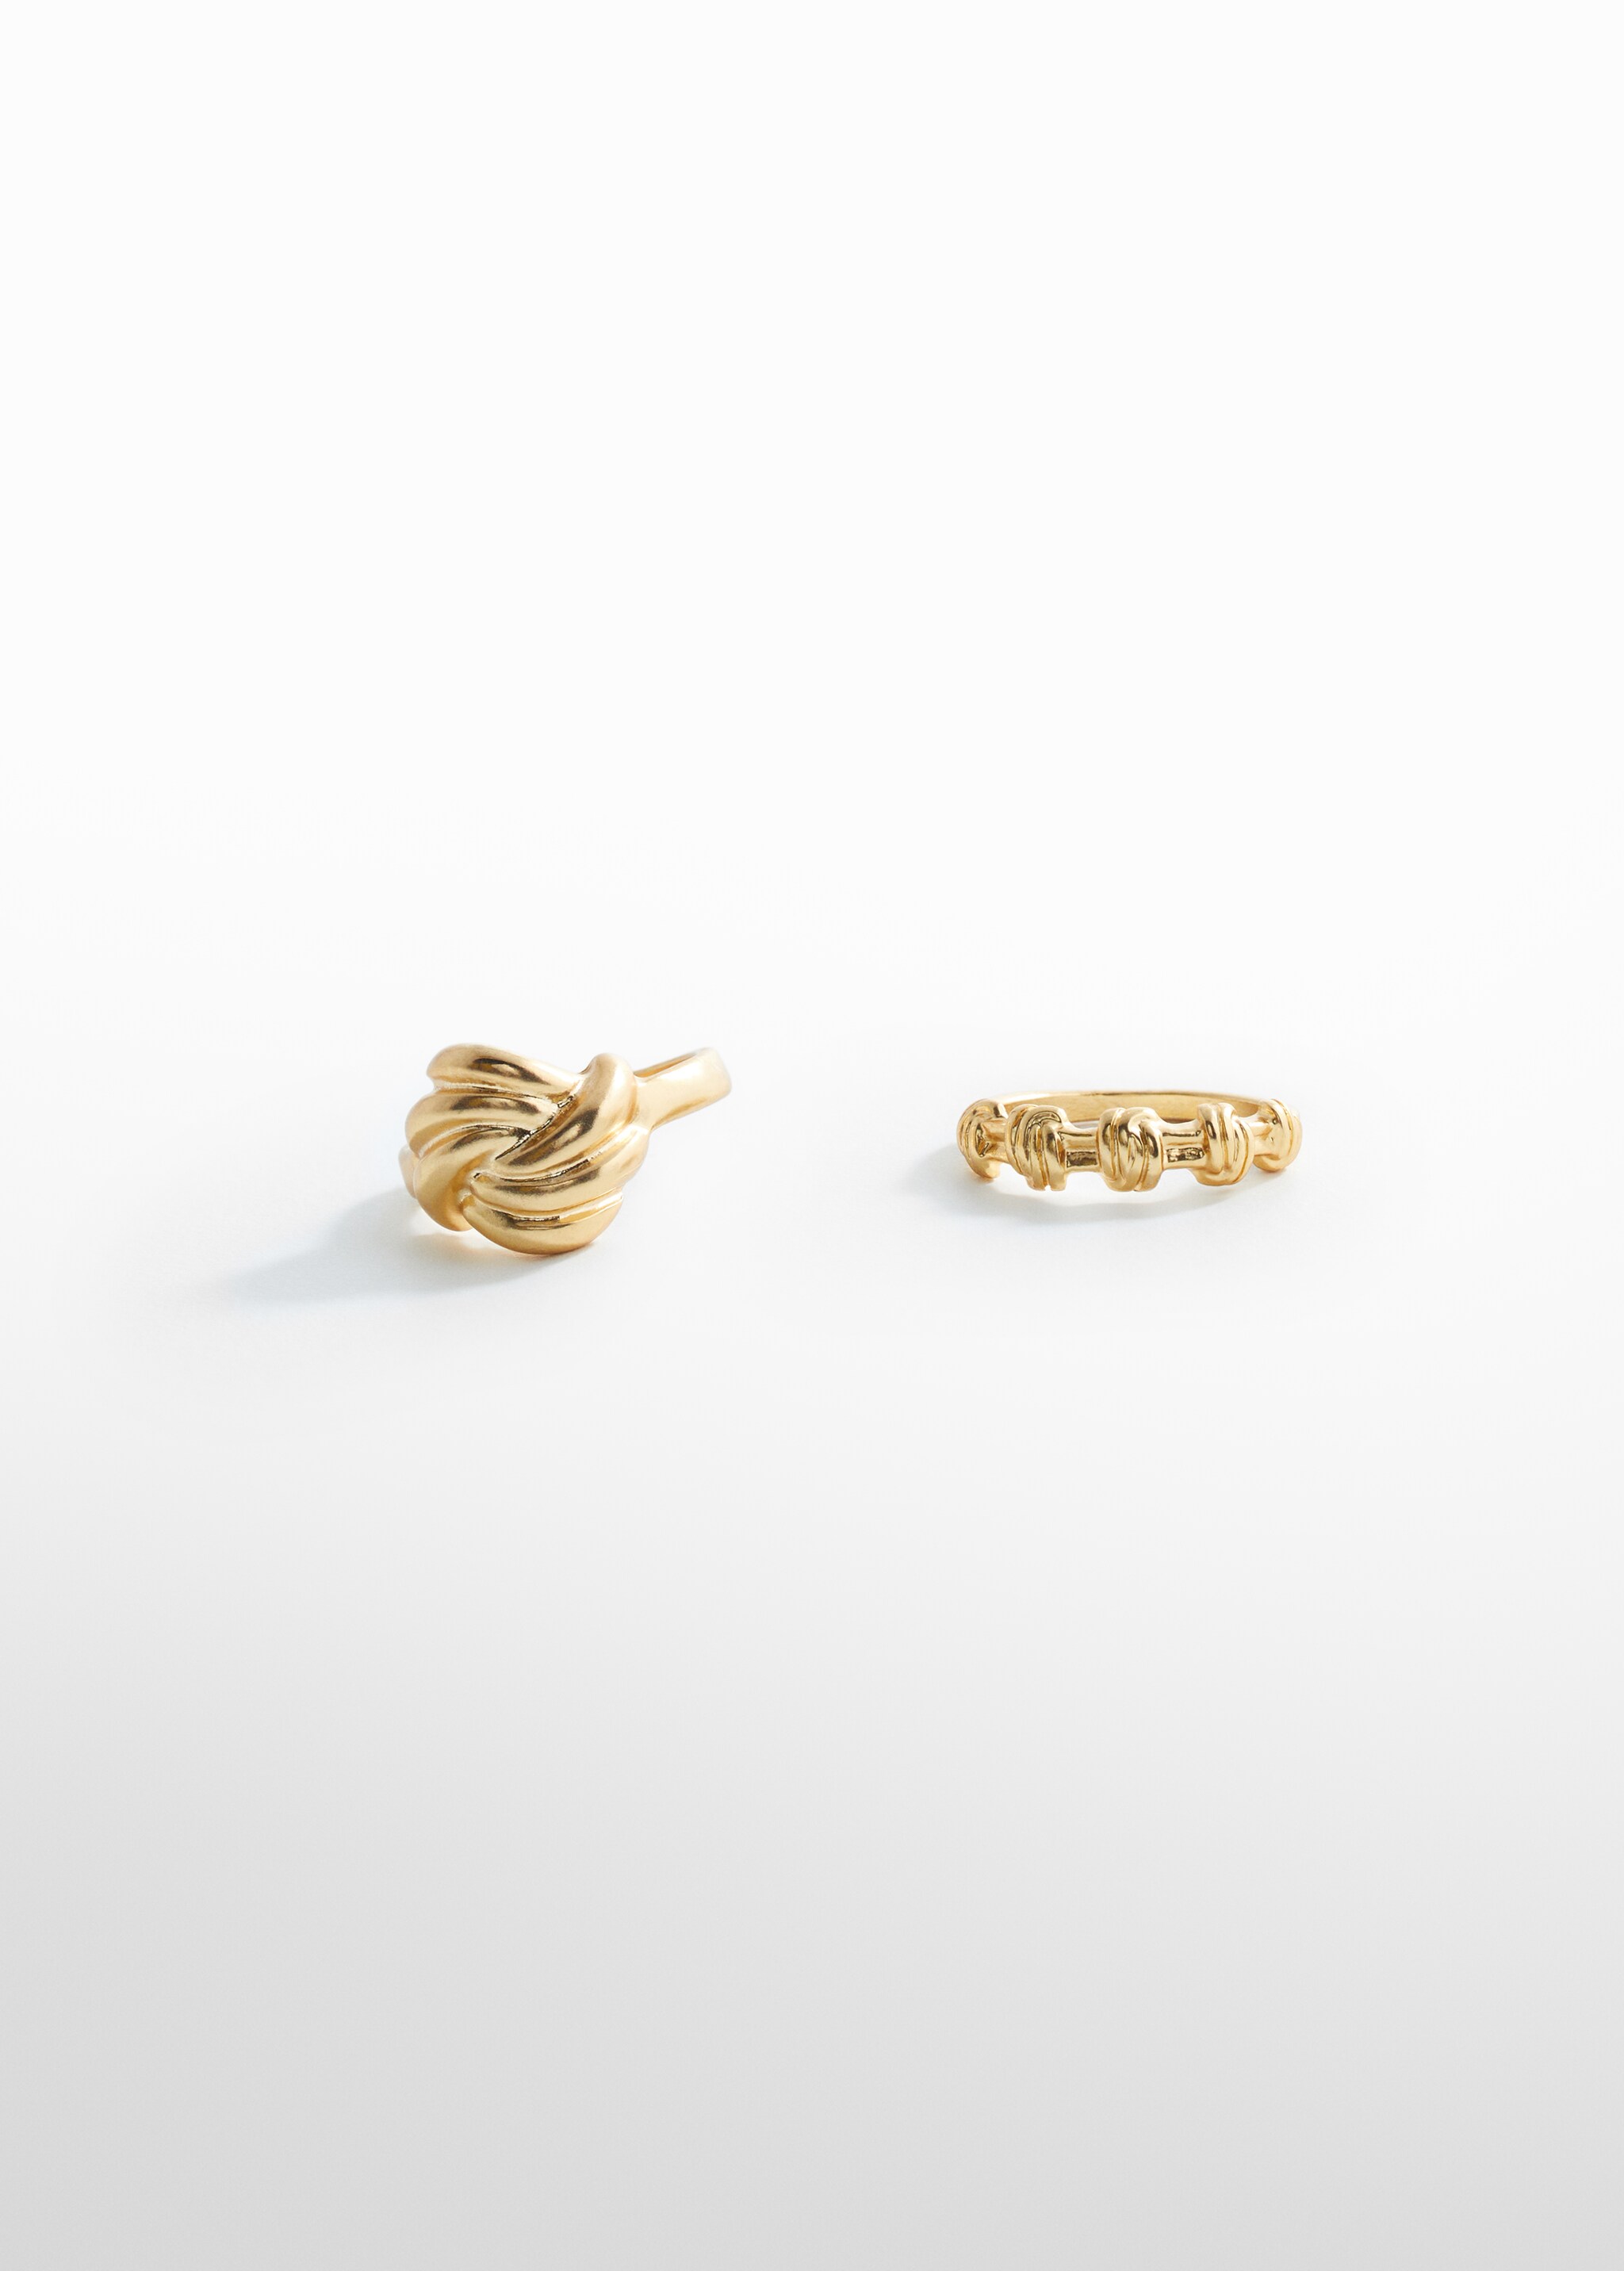 Set of interlocking rings  - Article without model